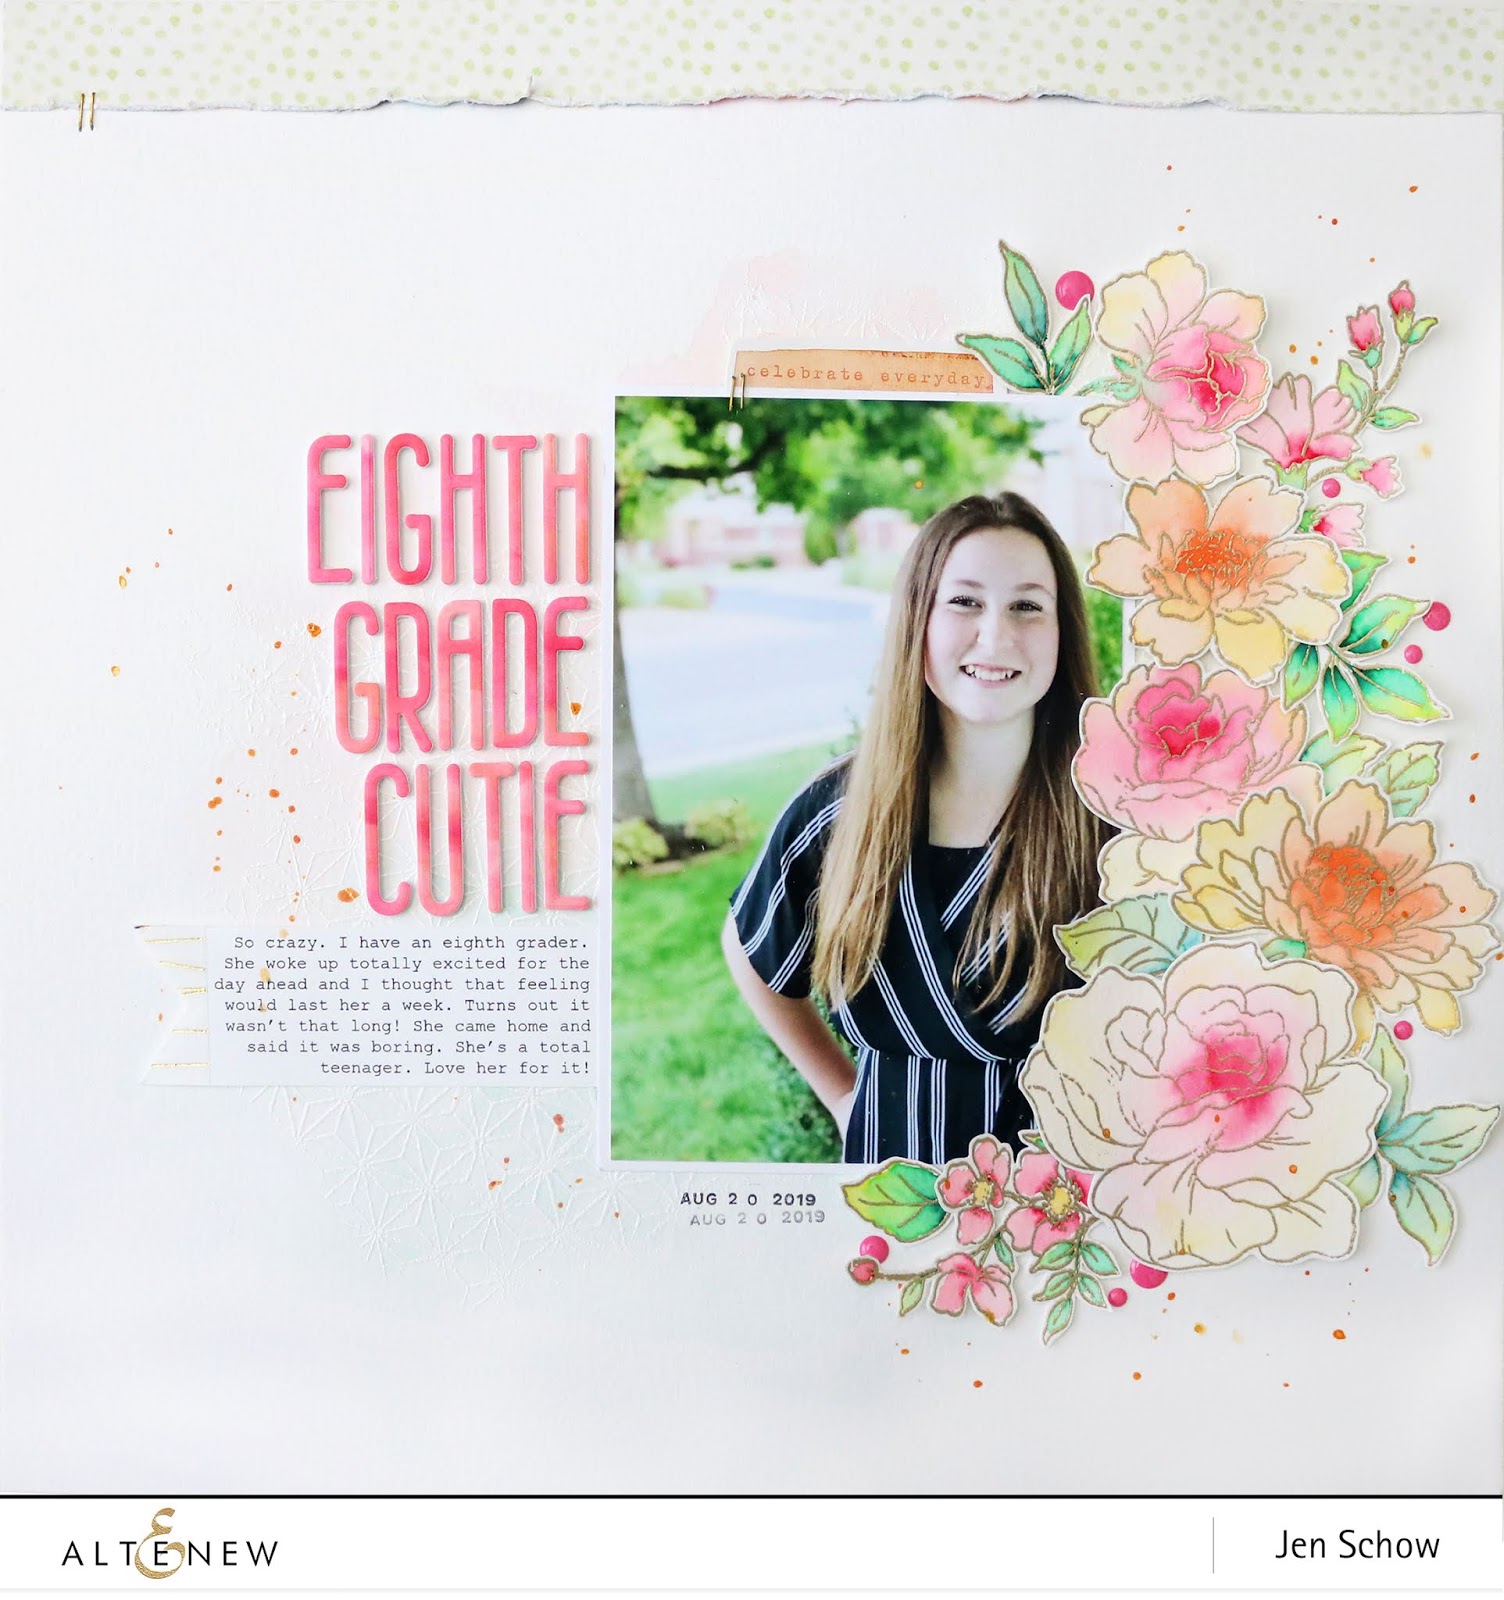 Altenew: A Year In Review Blog Hop & Giveaway – Mindy Eggen Design